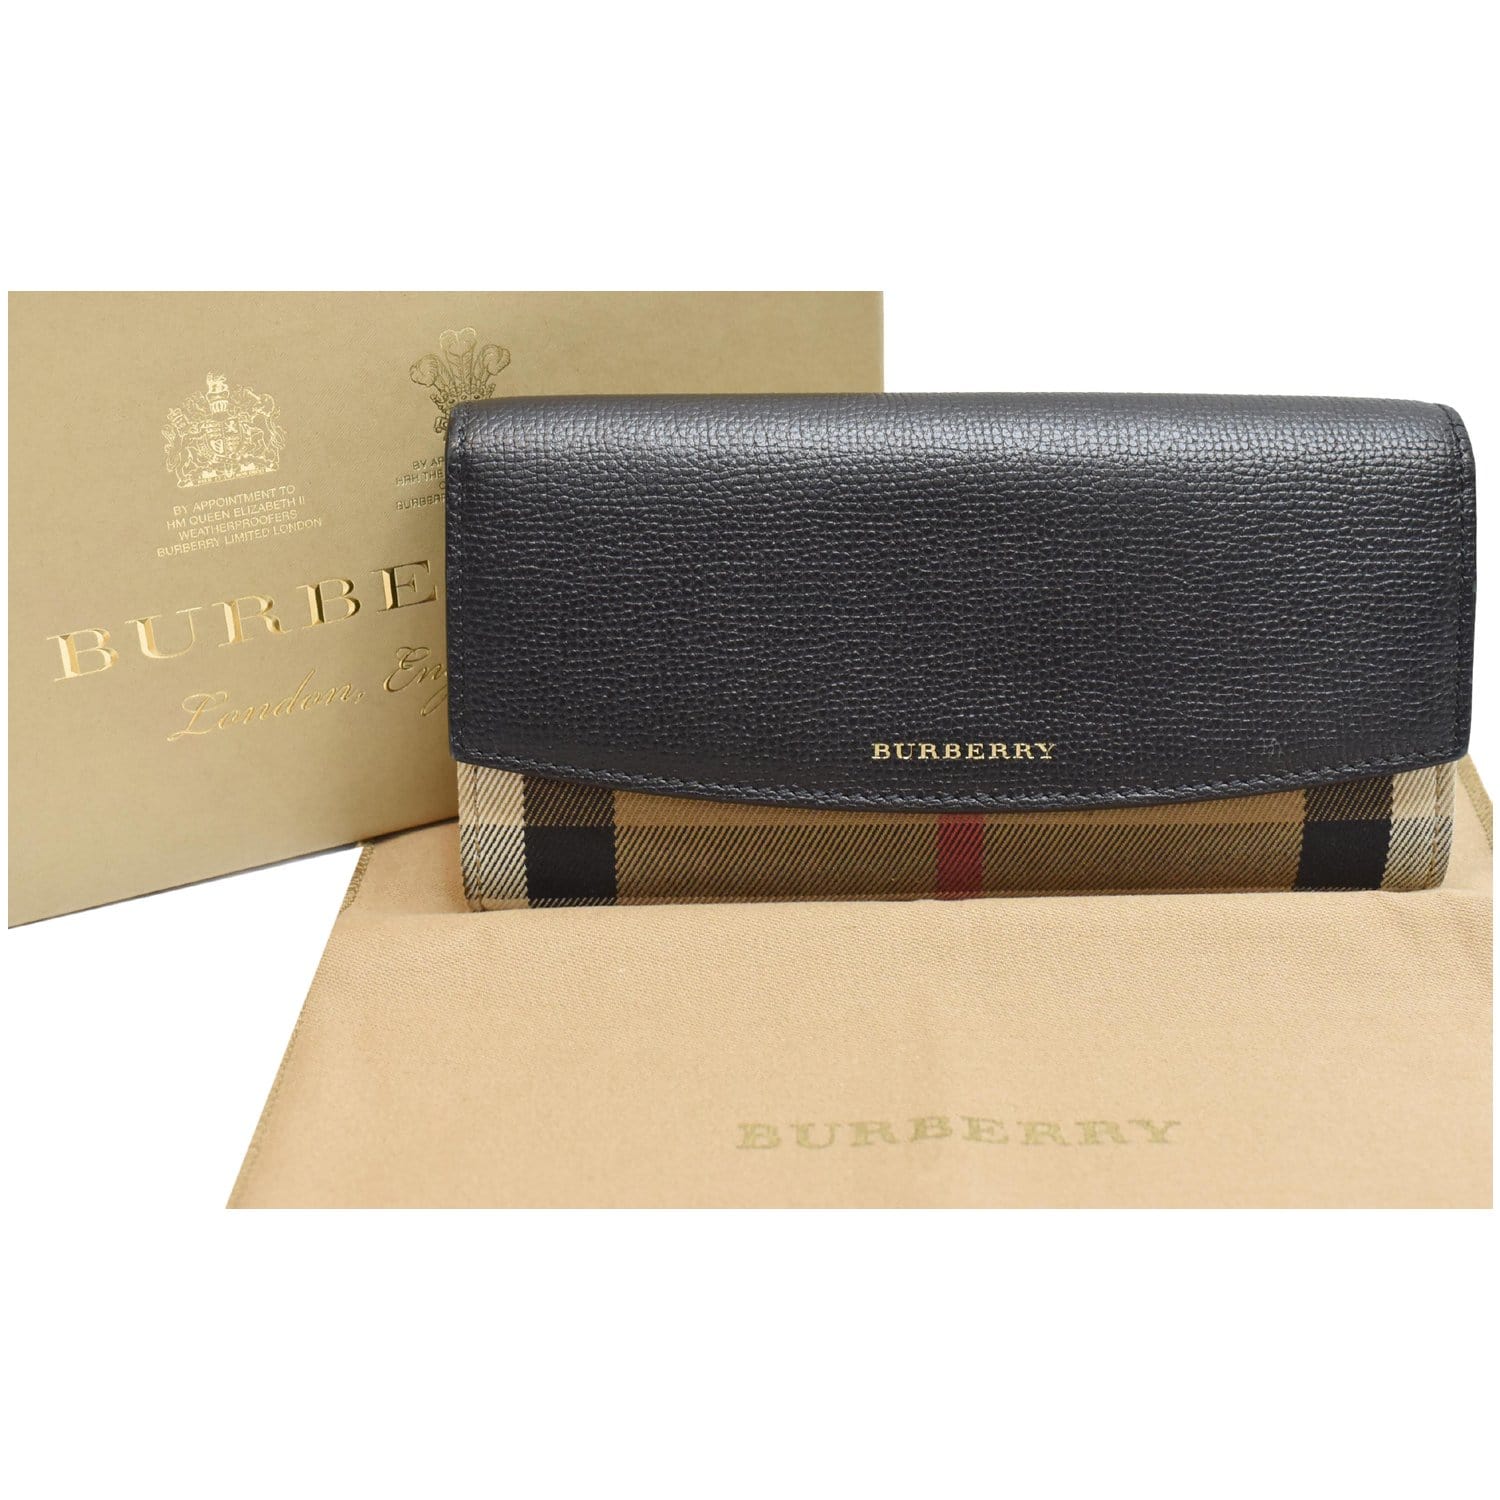 Burberry Porter Black Leather Flap Continental Long Wallet 80528311 $680